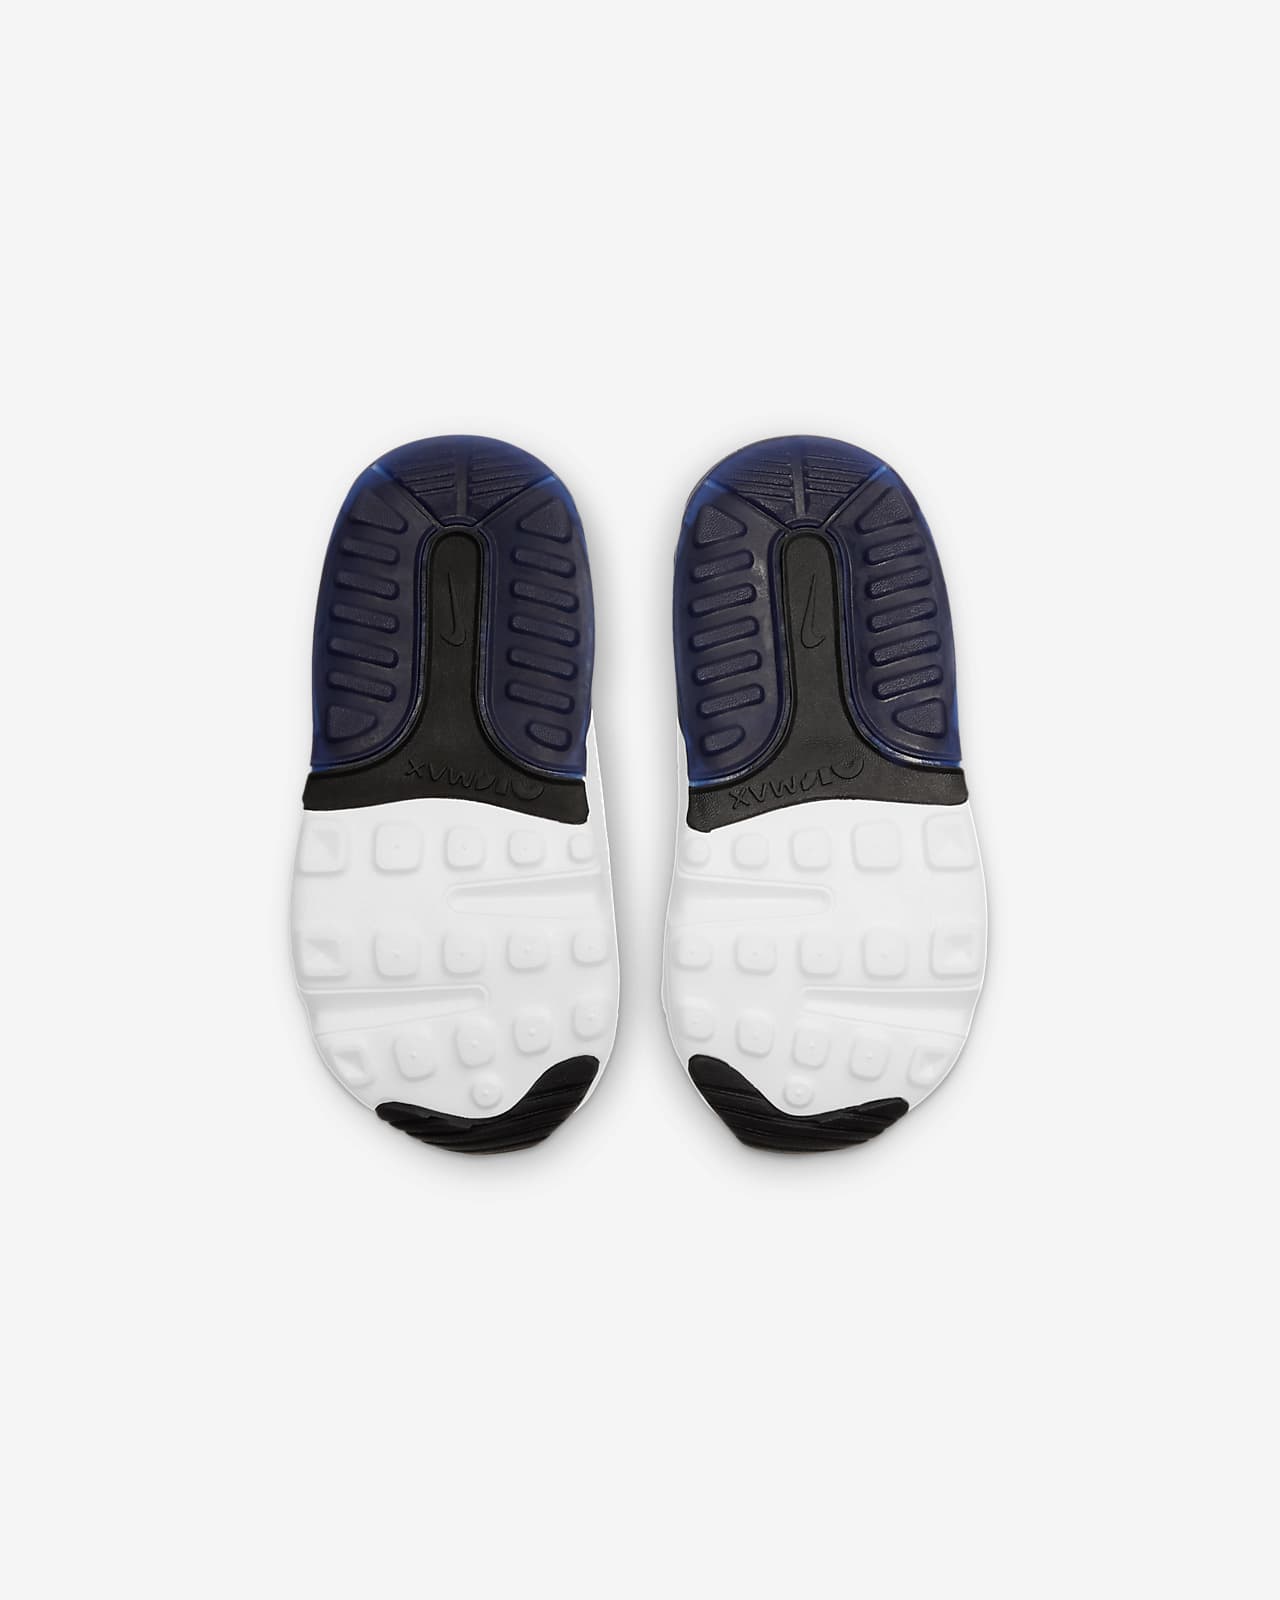 nike canada baby shoes